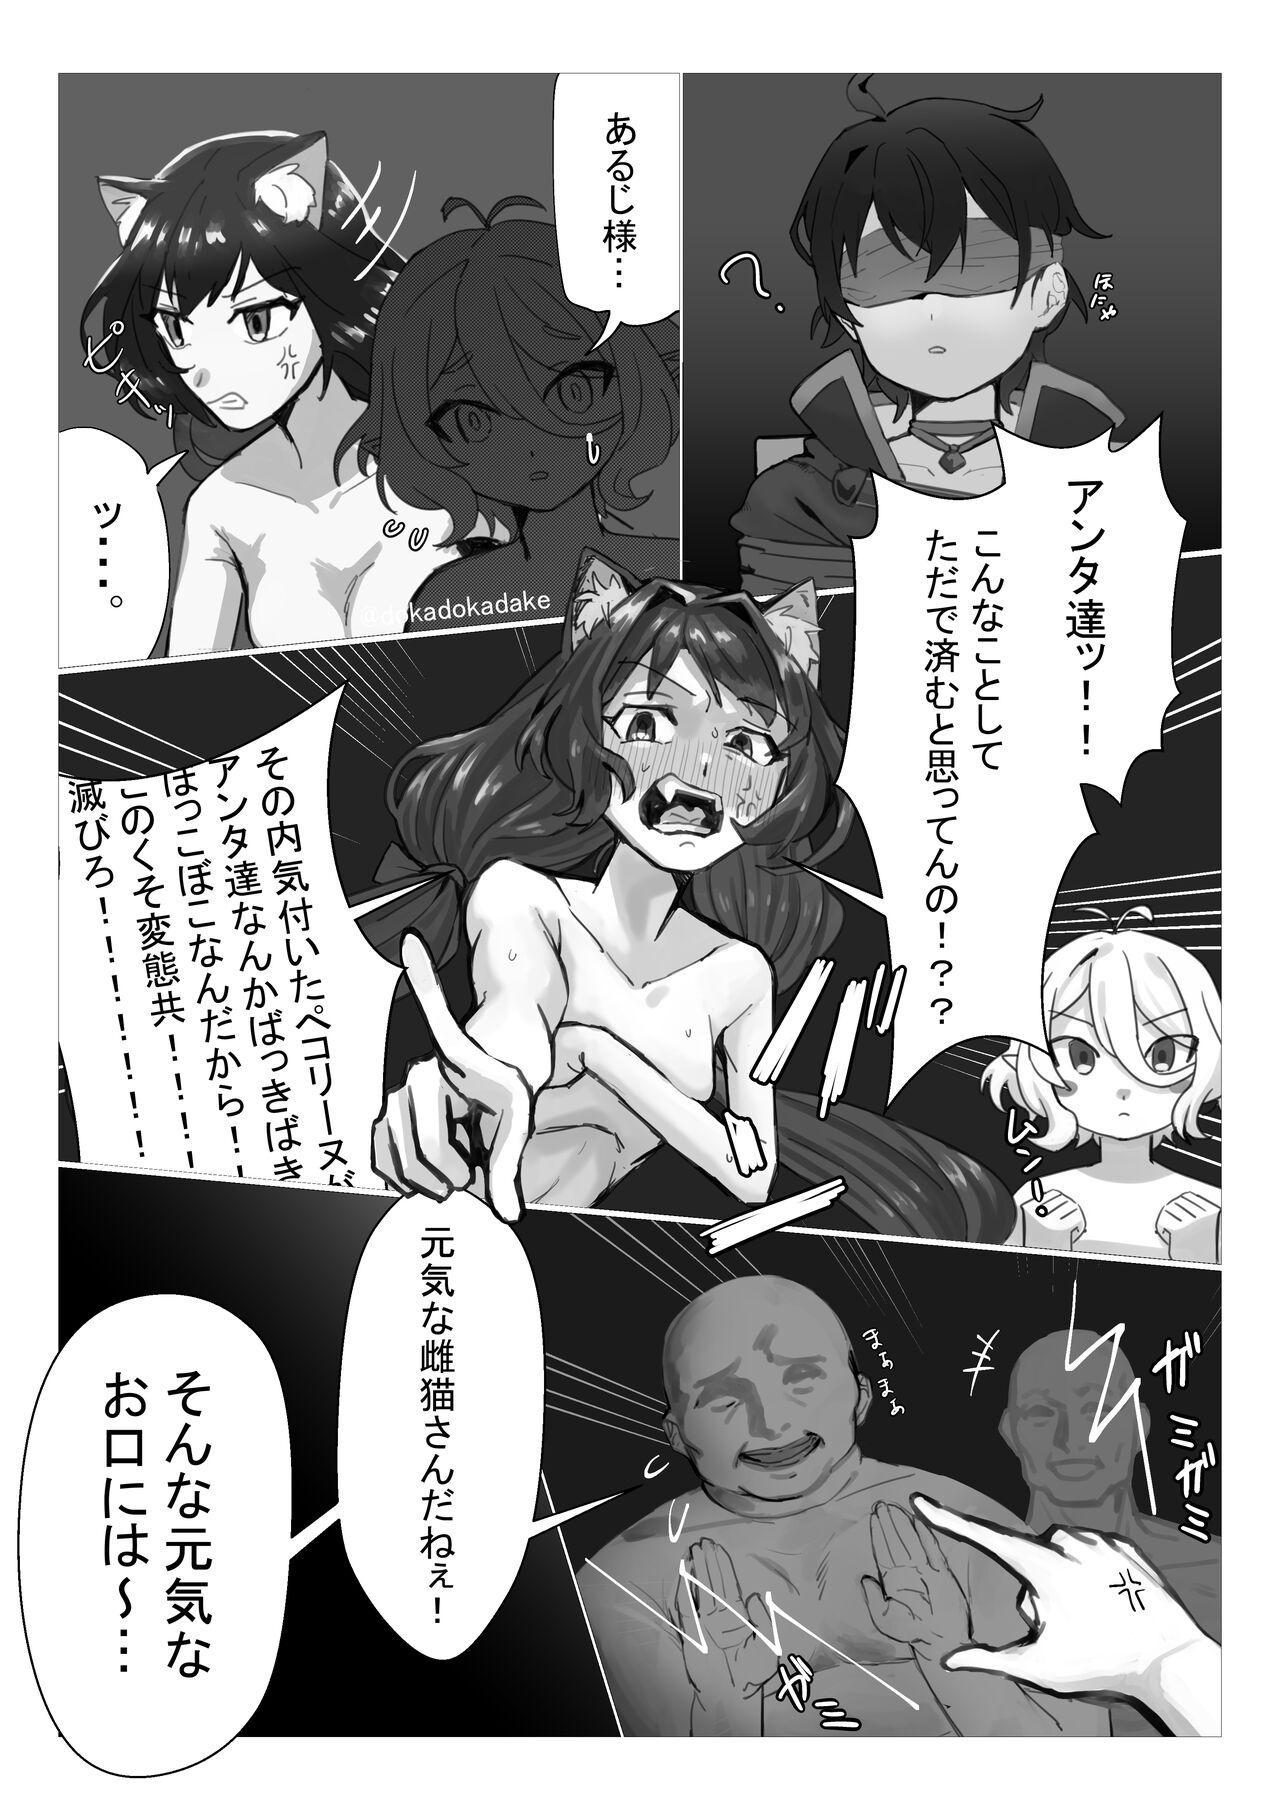 Newbie プリコネ輪姦NTR漫画 - Princess connect Pussy Play - Picture 2